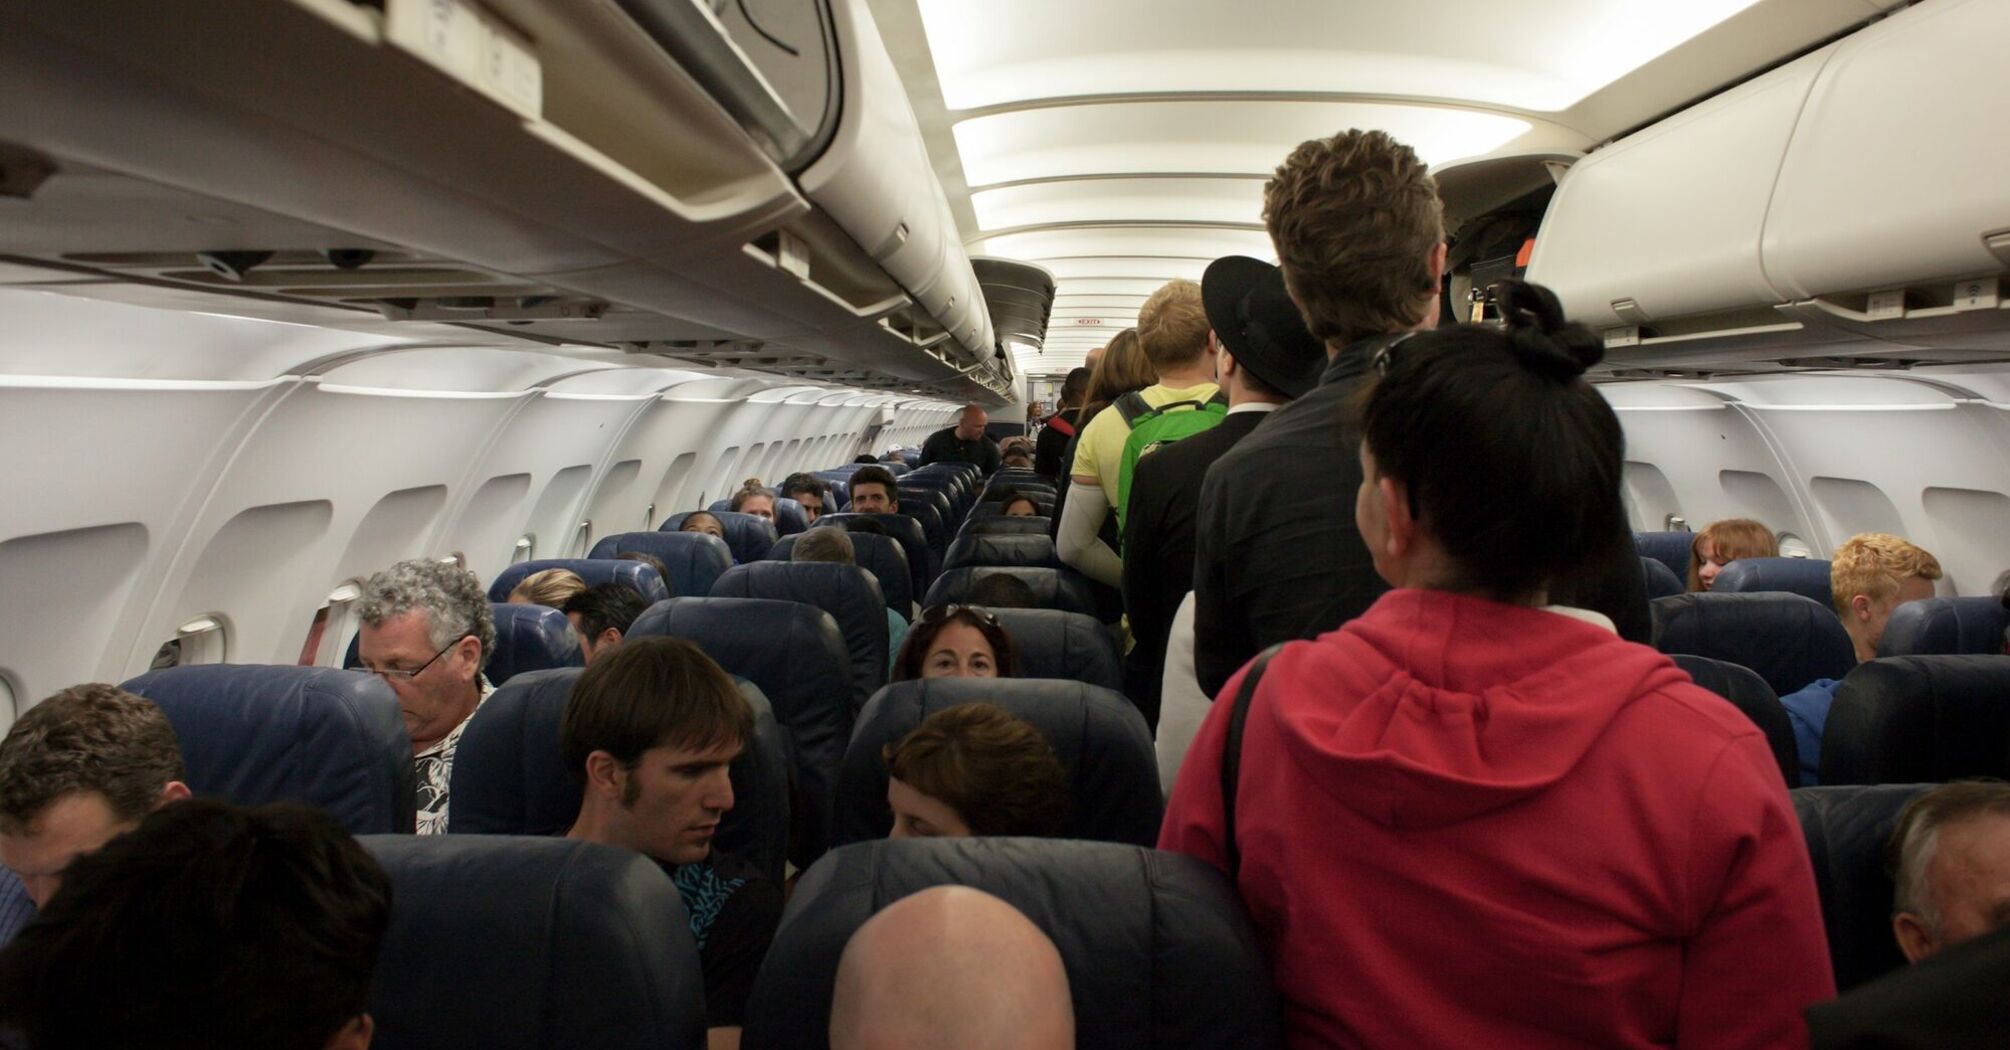 Passengers standing in aisle waiting to deplane 